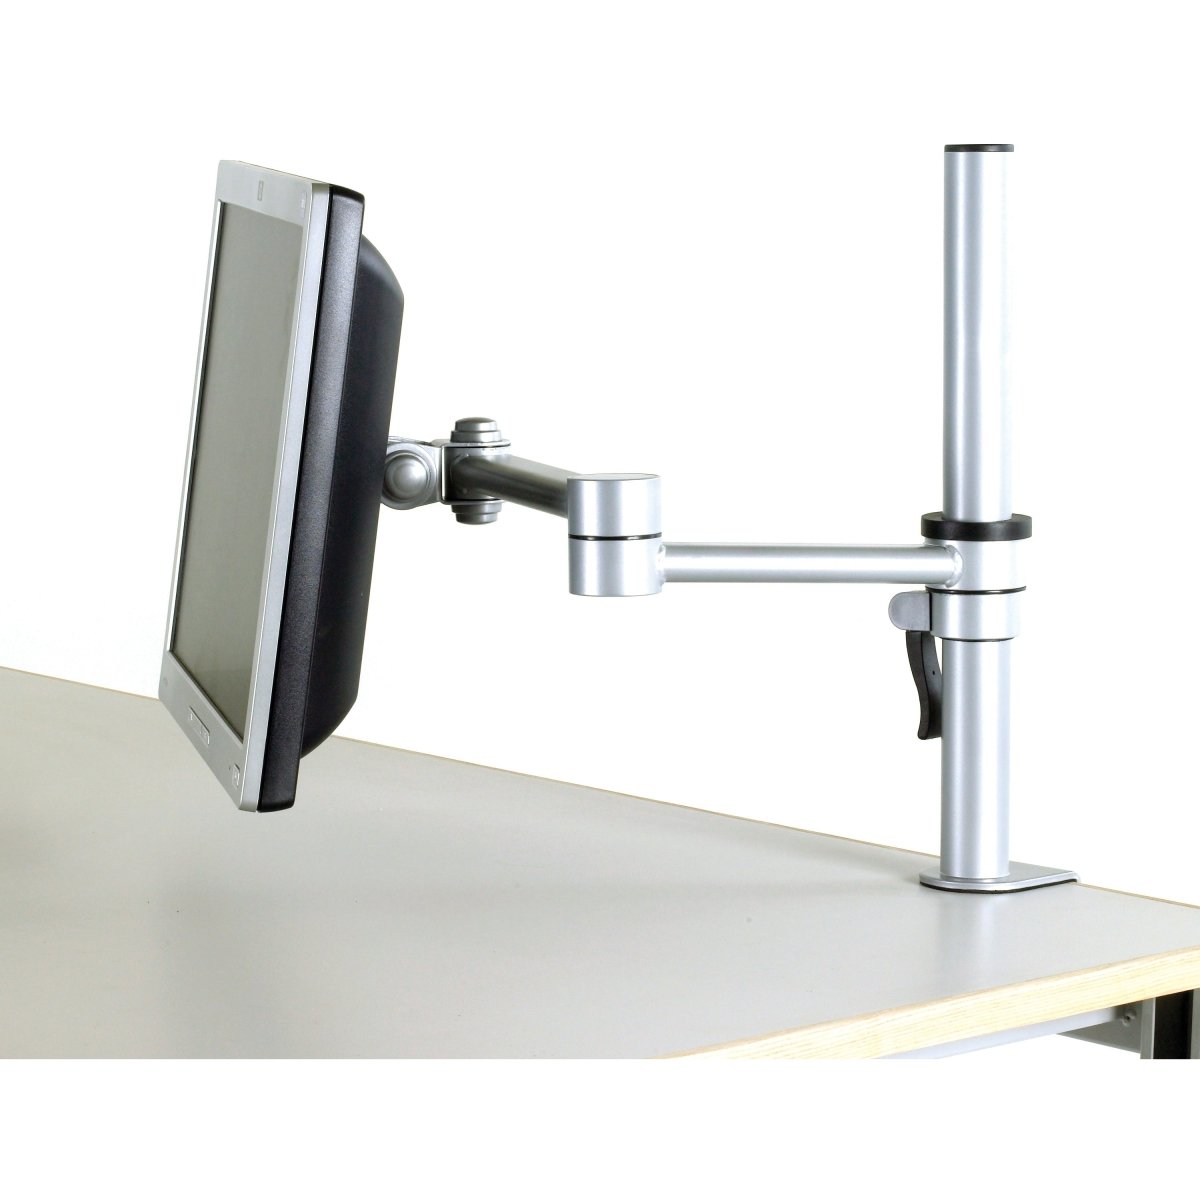 Workbench Monitor Arm - Warehouse Storage Products